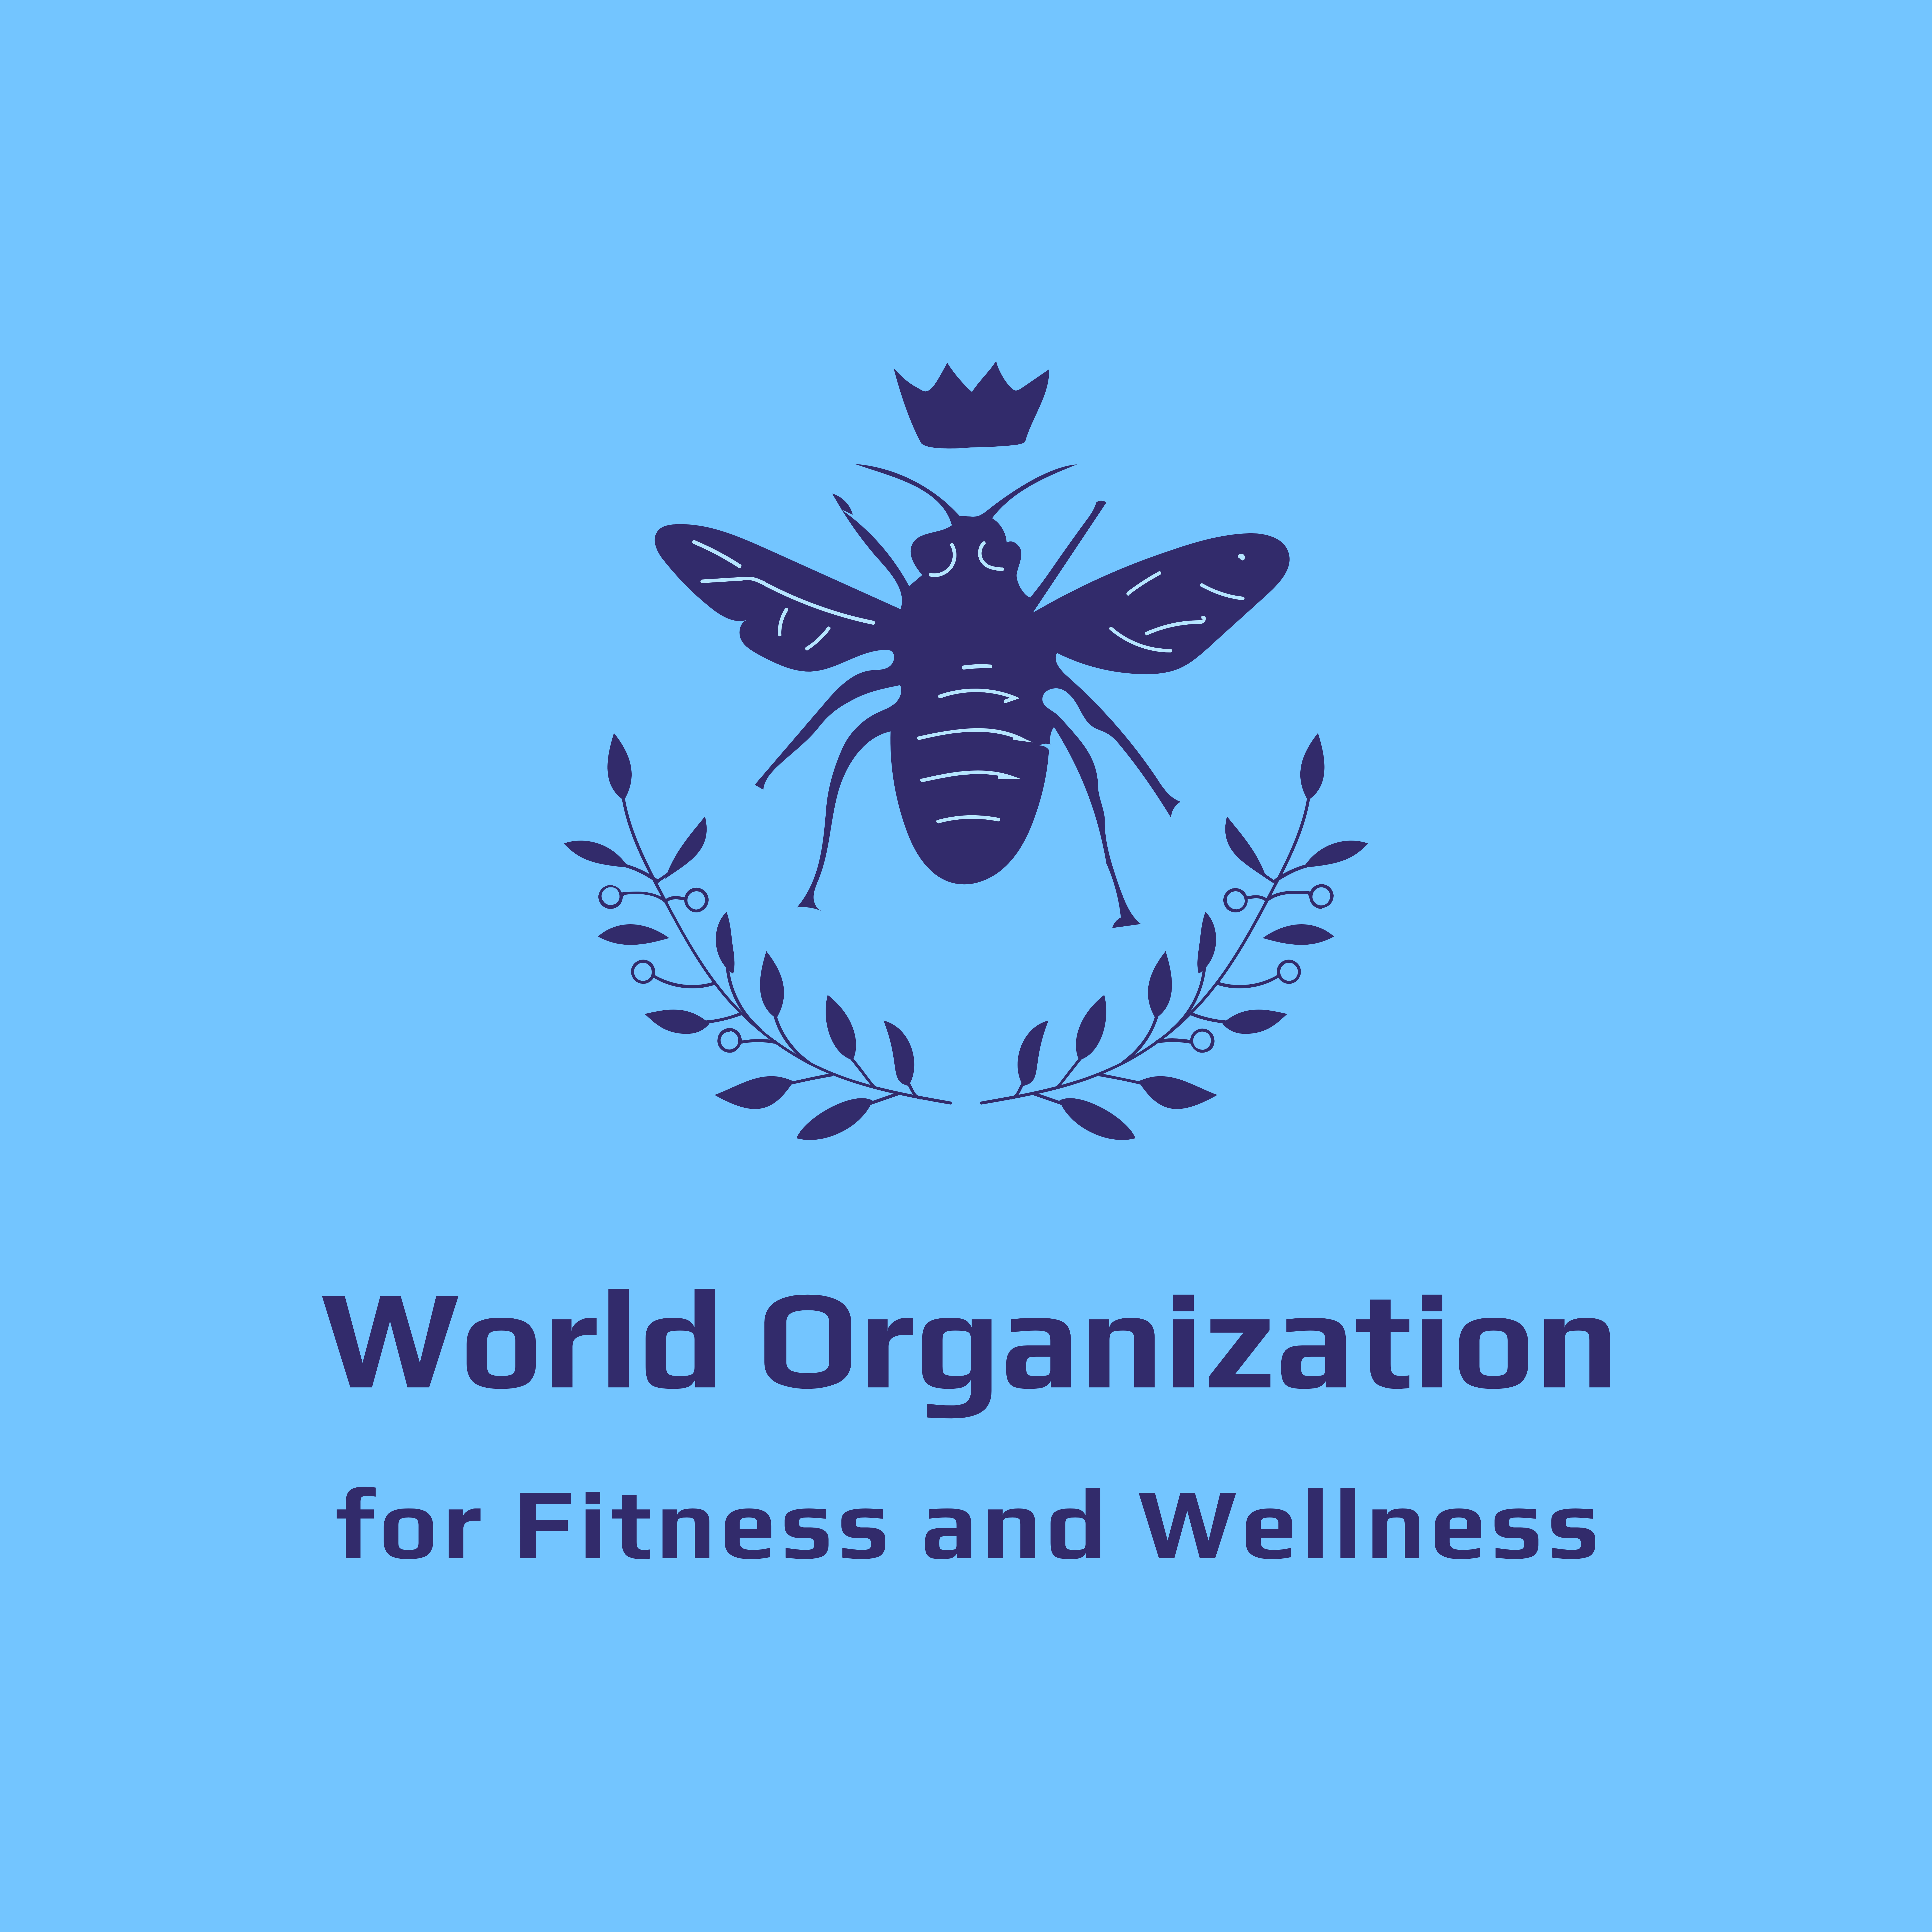 More about World Organization for Fitness and Wellness